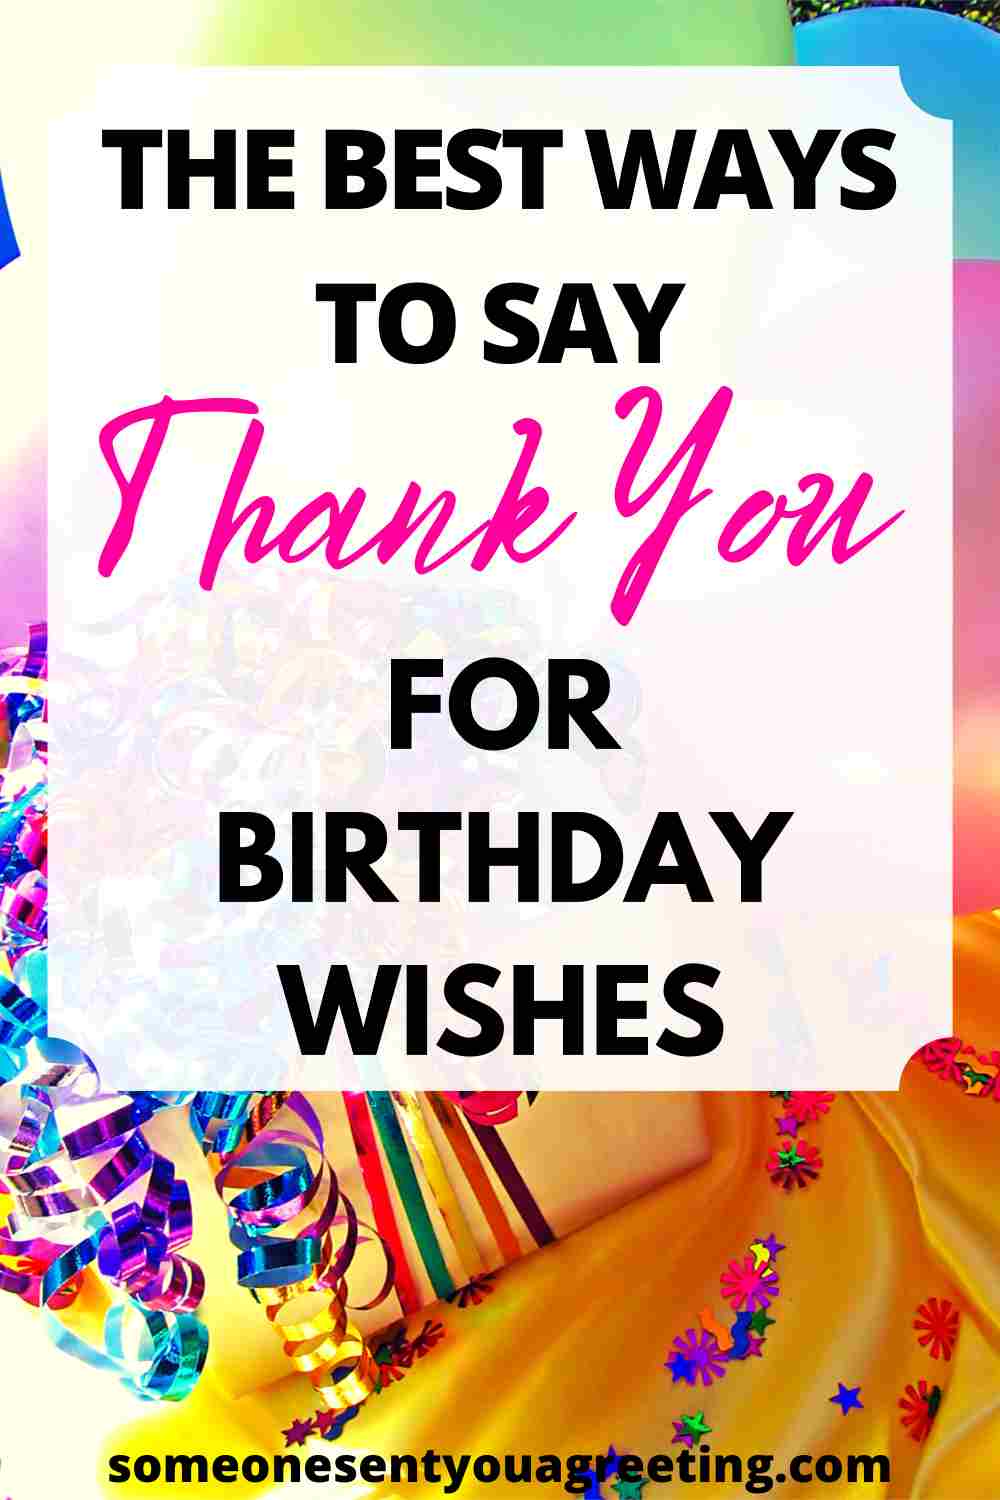 The 41 Best Ways to Say Thank You for Birthday Wishes - Someone ...